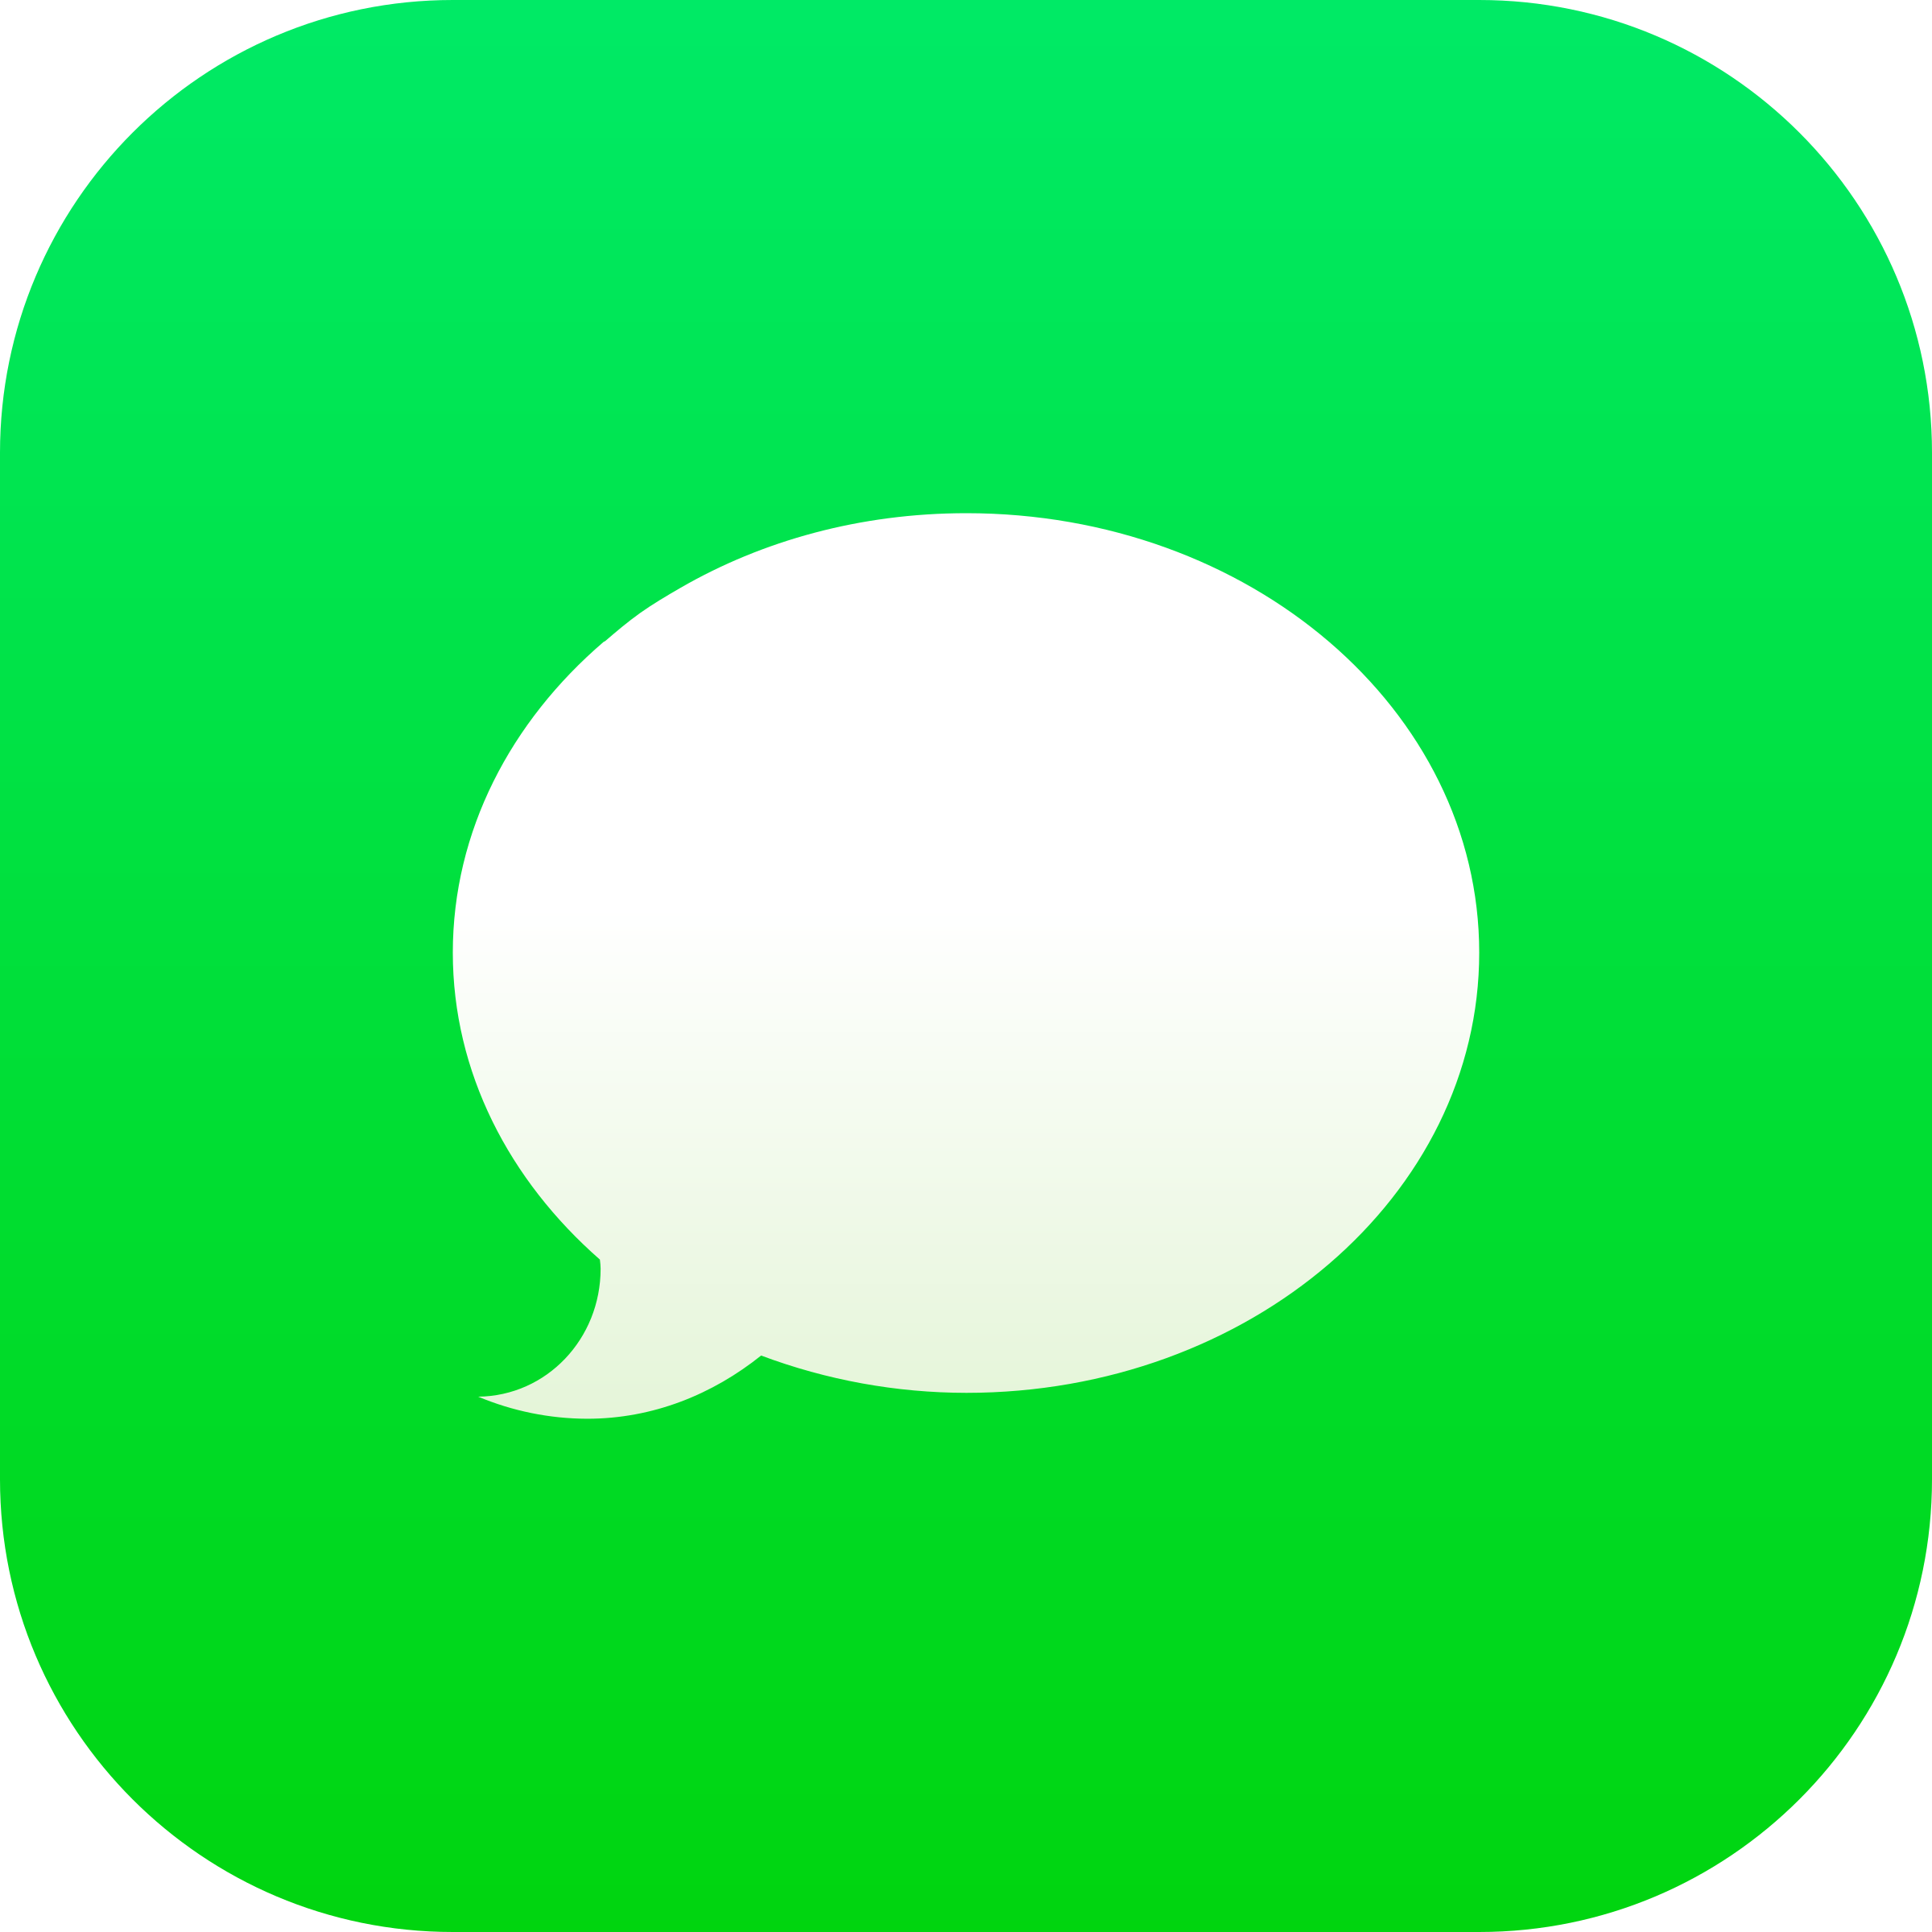 free message app download